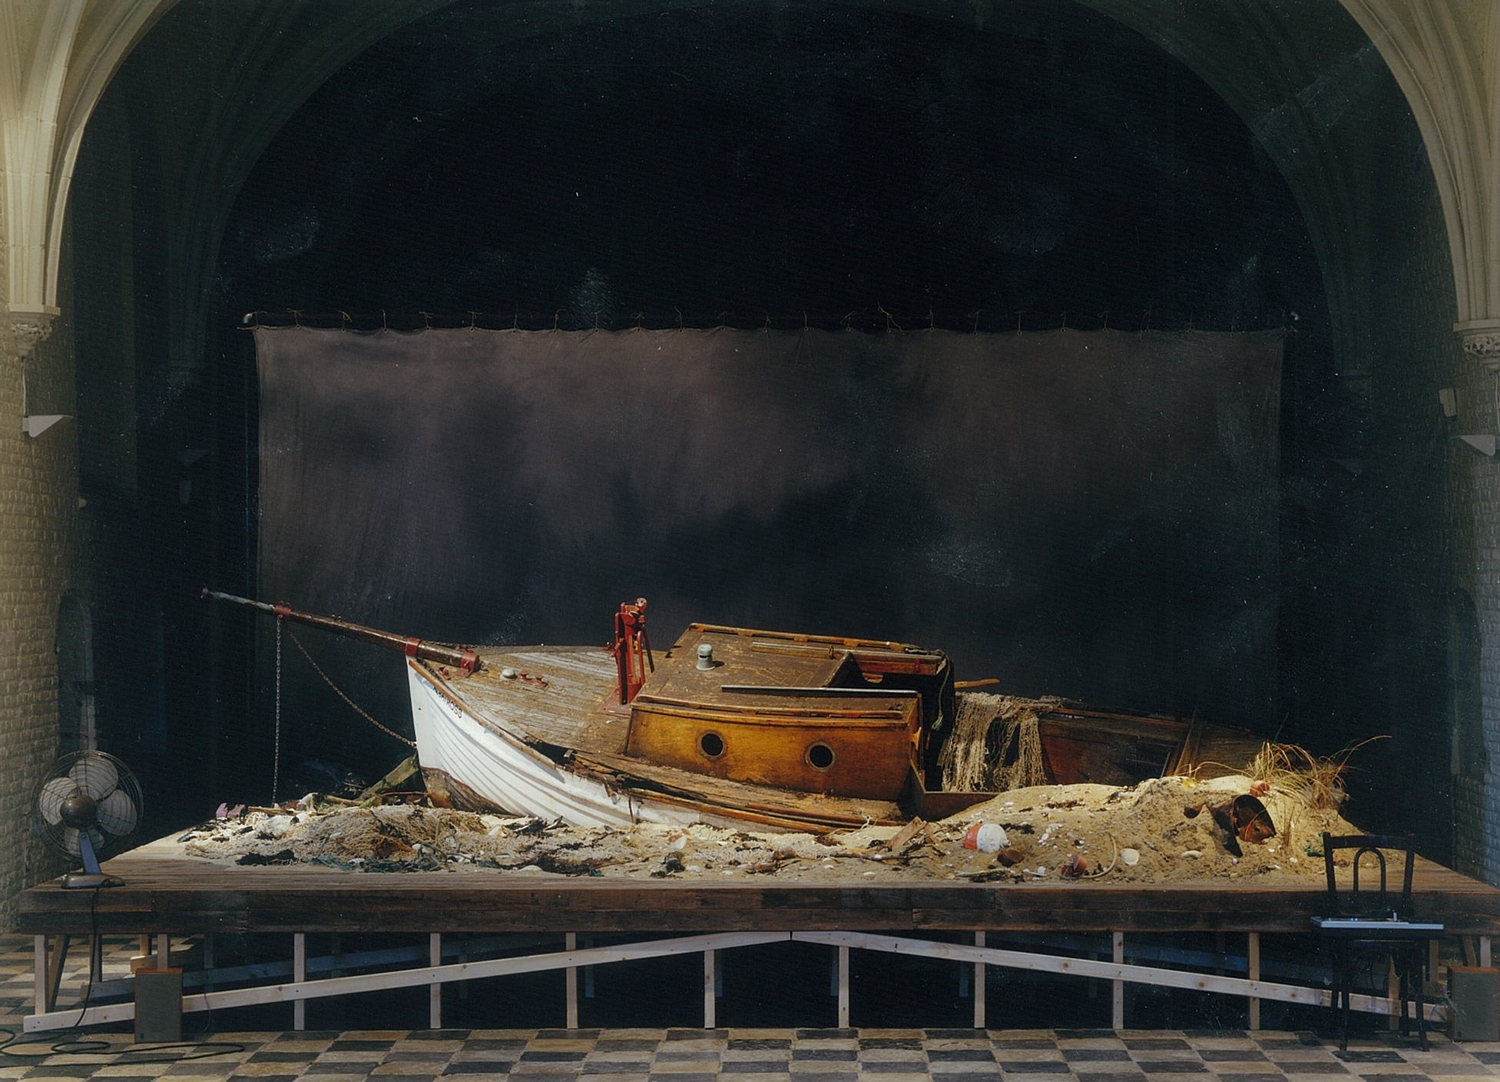 Mark Dion, 'Flotsam and Jetsam (the end of the game)', 1995. Installatiefoto | Flotsam and Jetsam (the end of the game) | Mark Dion